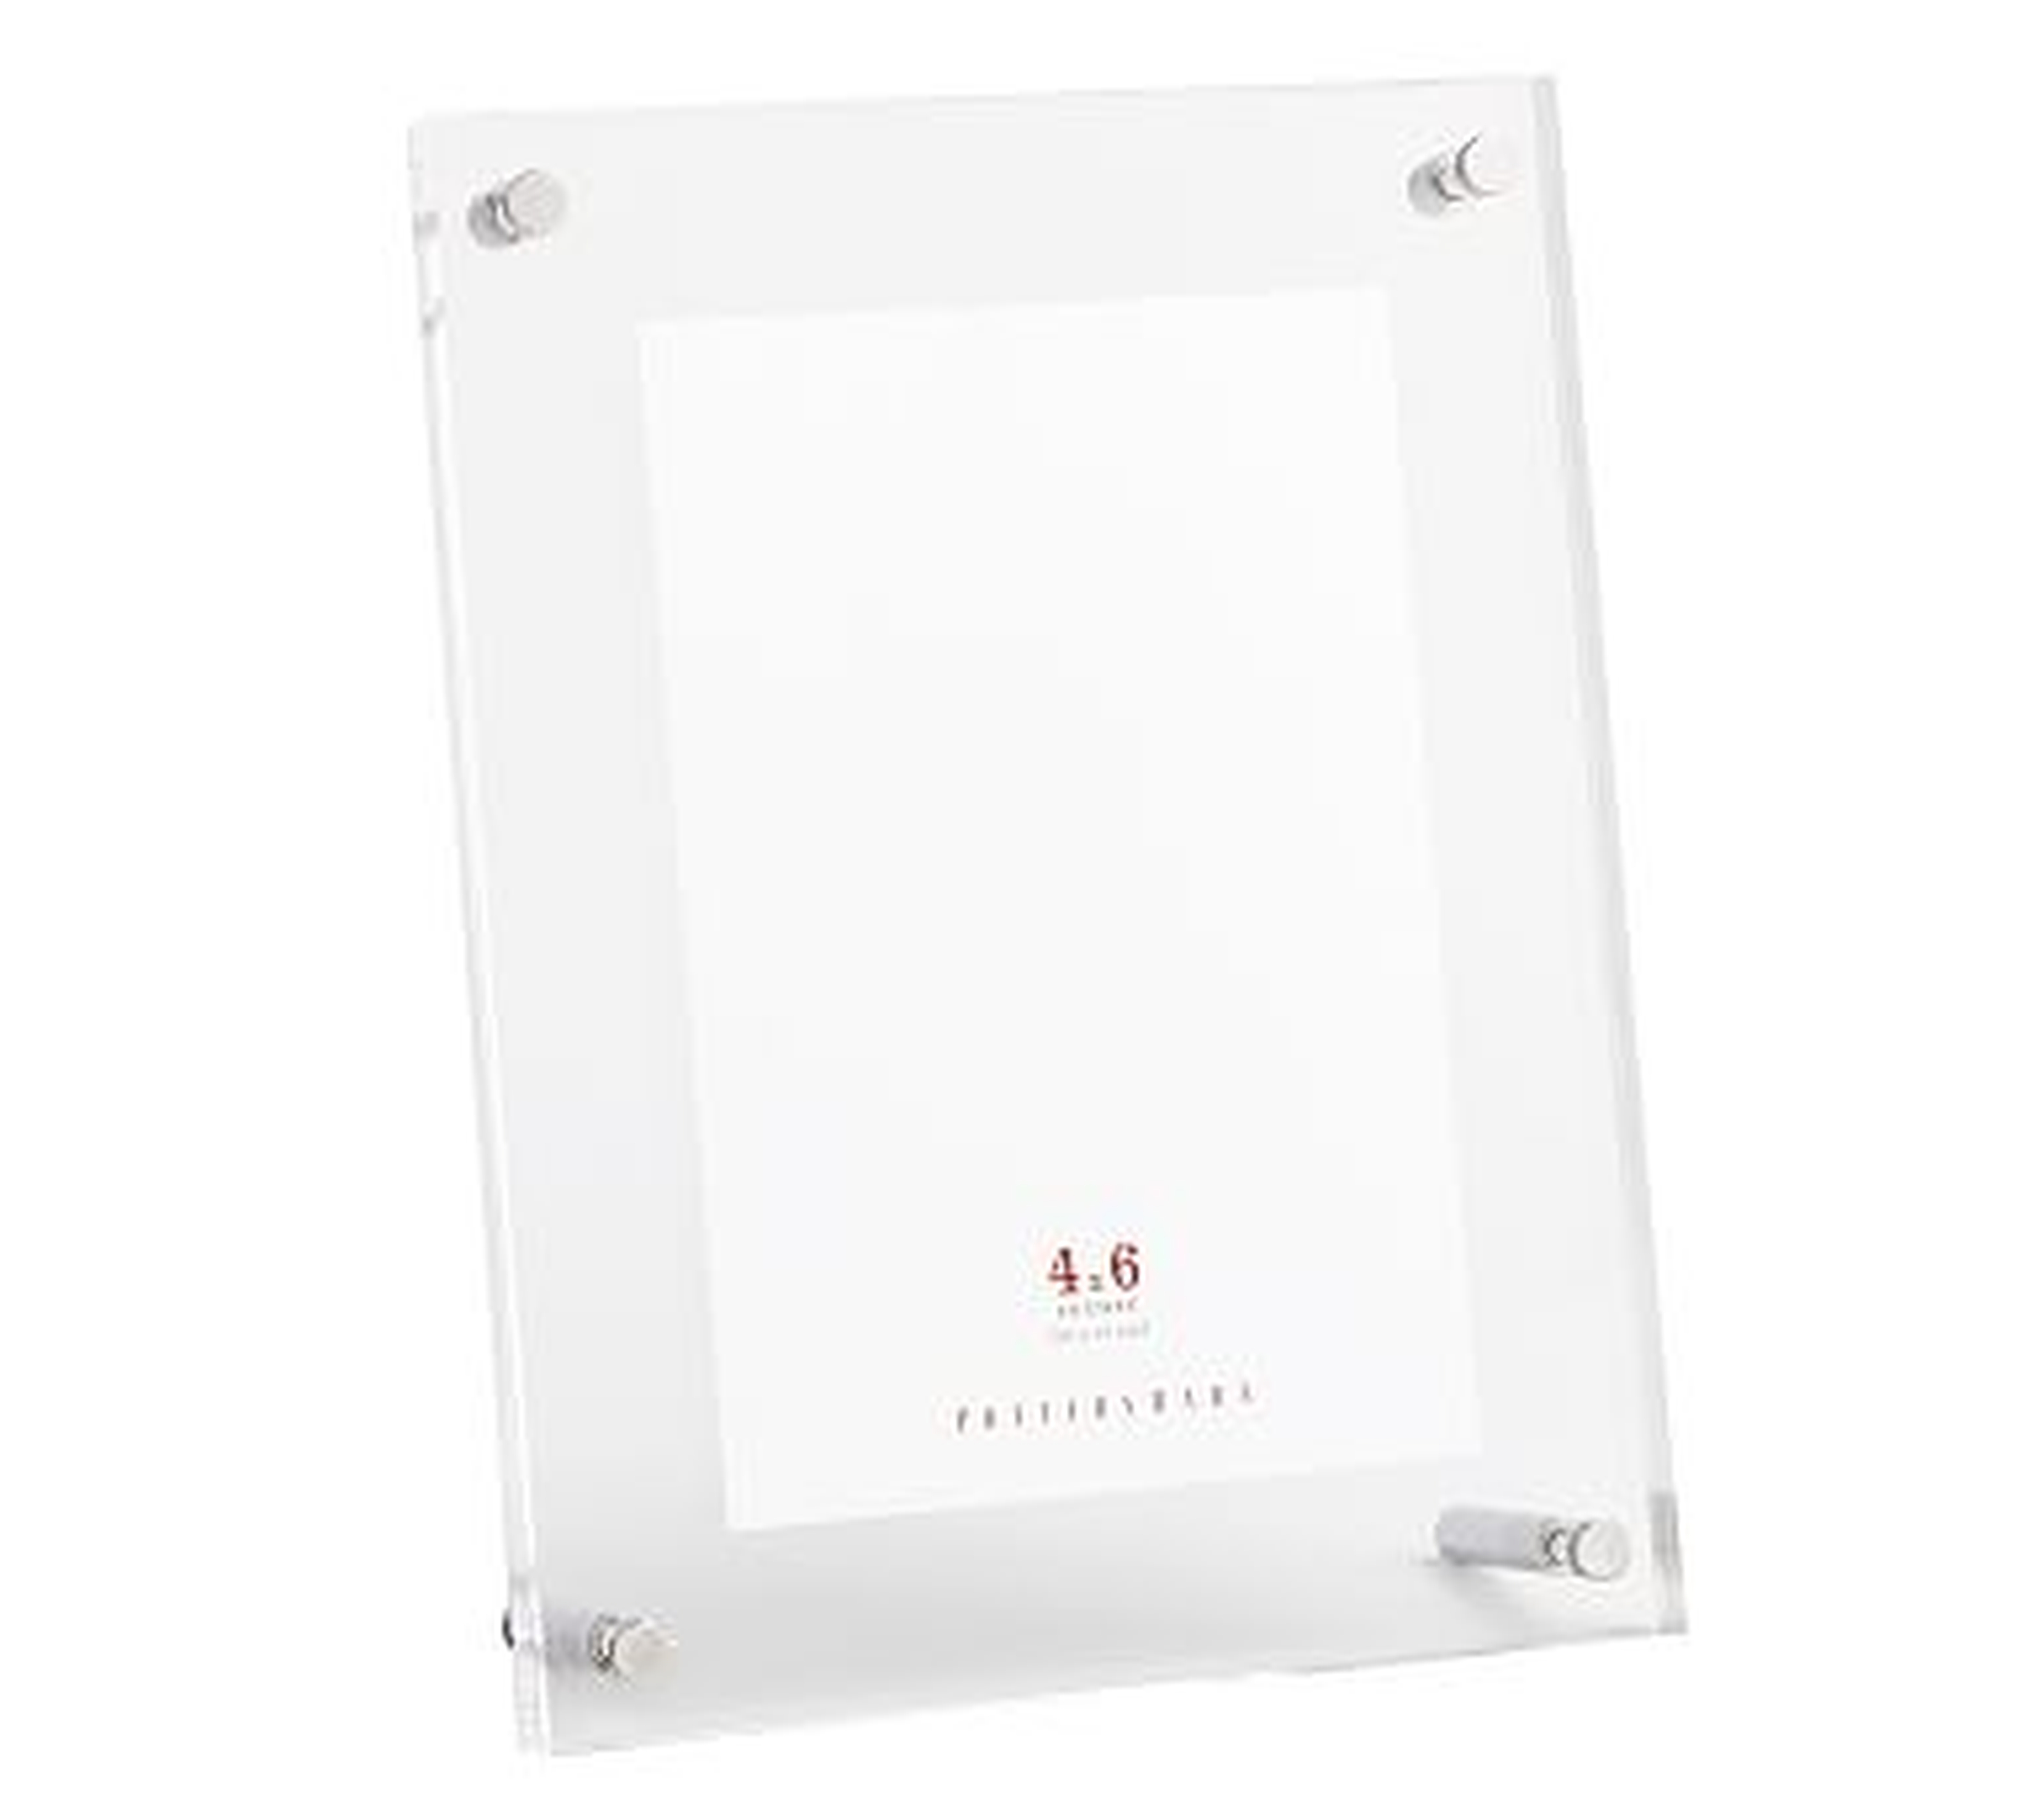 Acrylic Tabletop Picture Frame, Silver, 4" x 6" - Pottery Barn